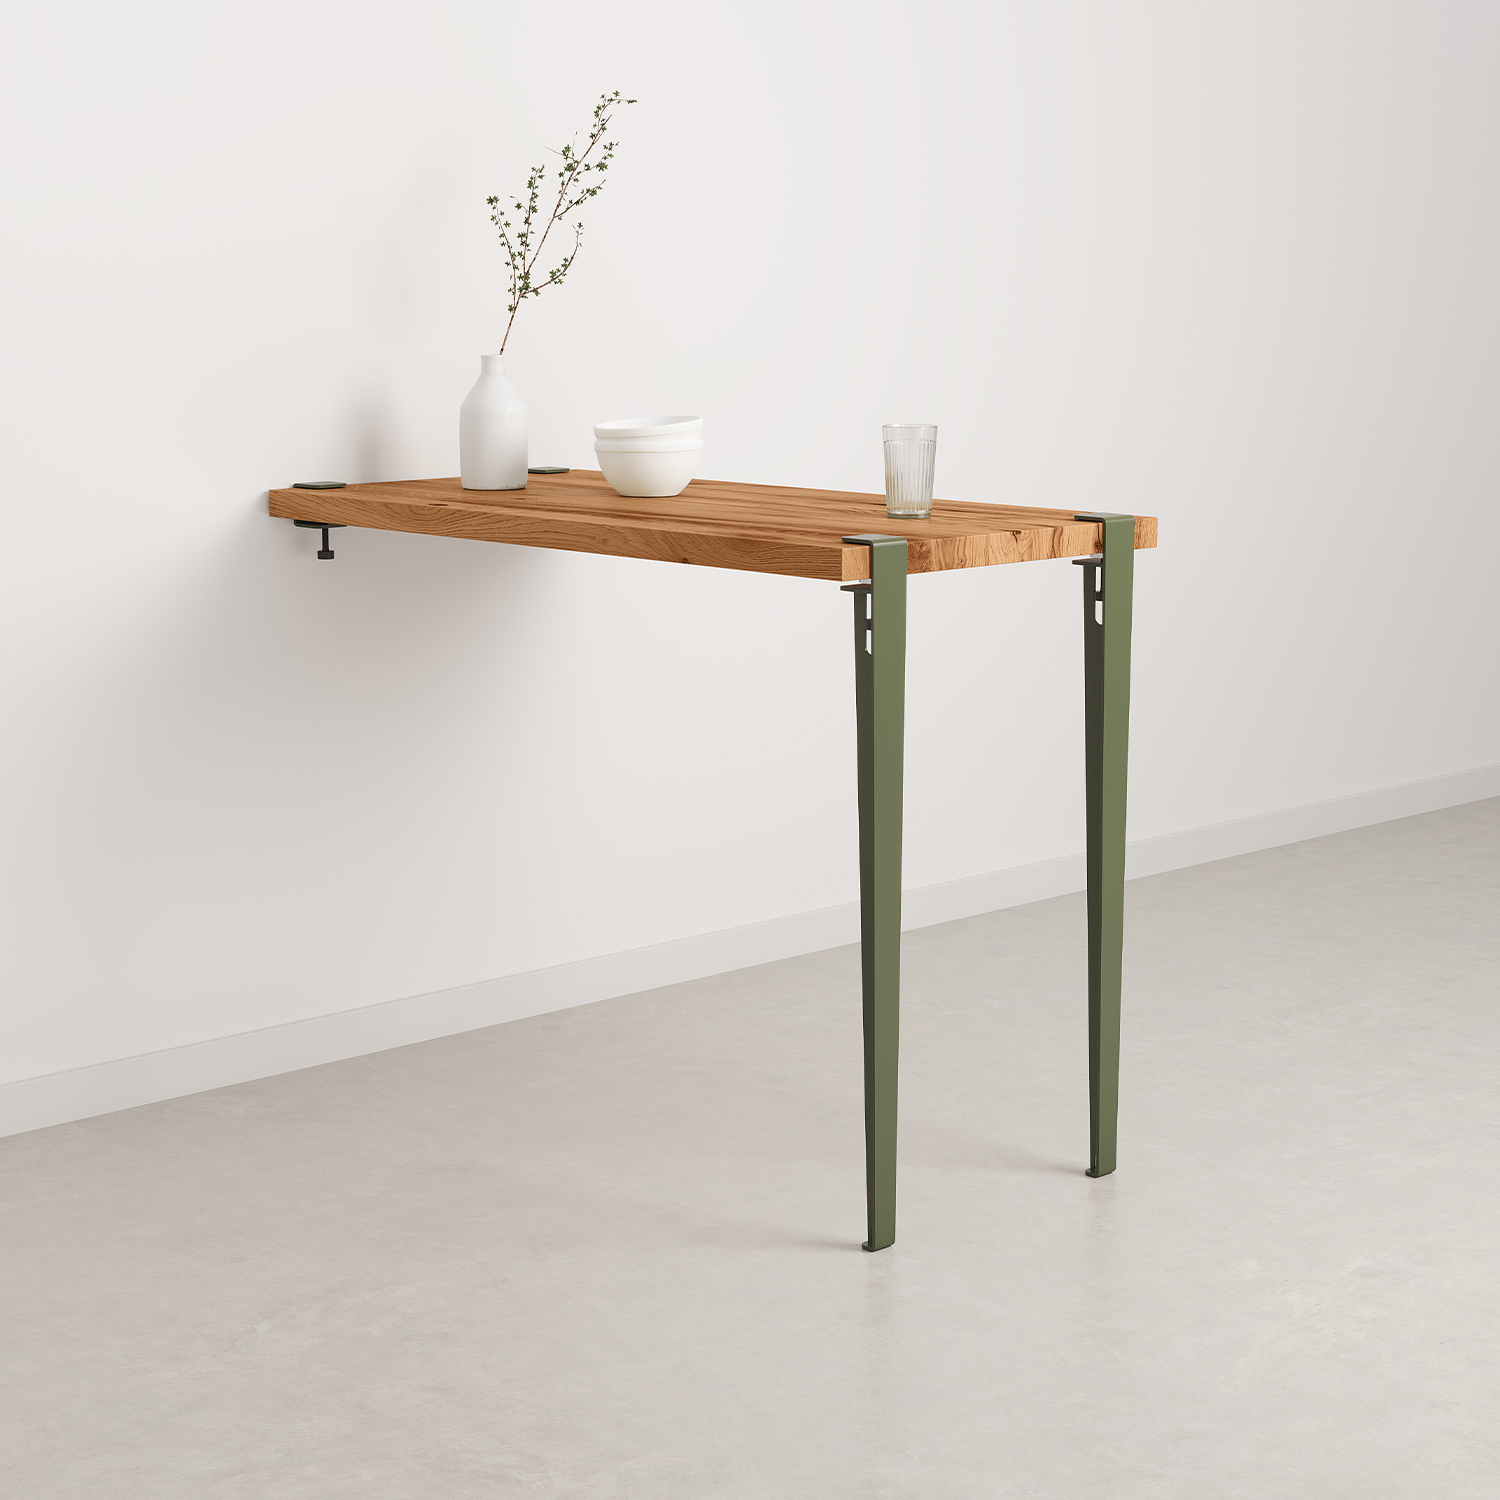 Wall–mounted high table – height 90 or 110cm - reclaimed wood